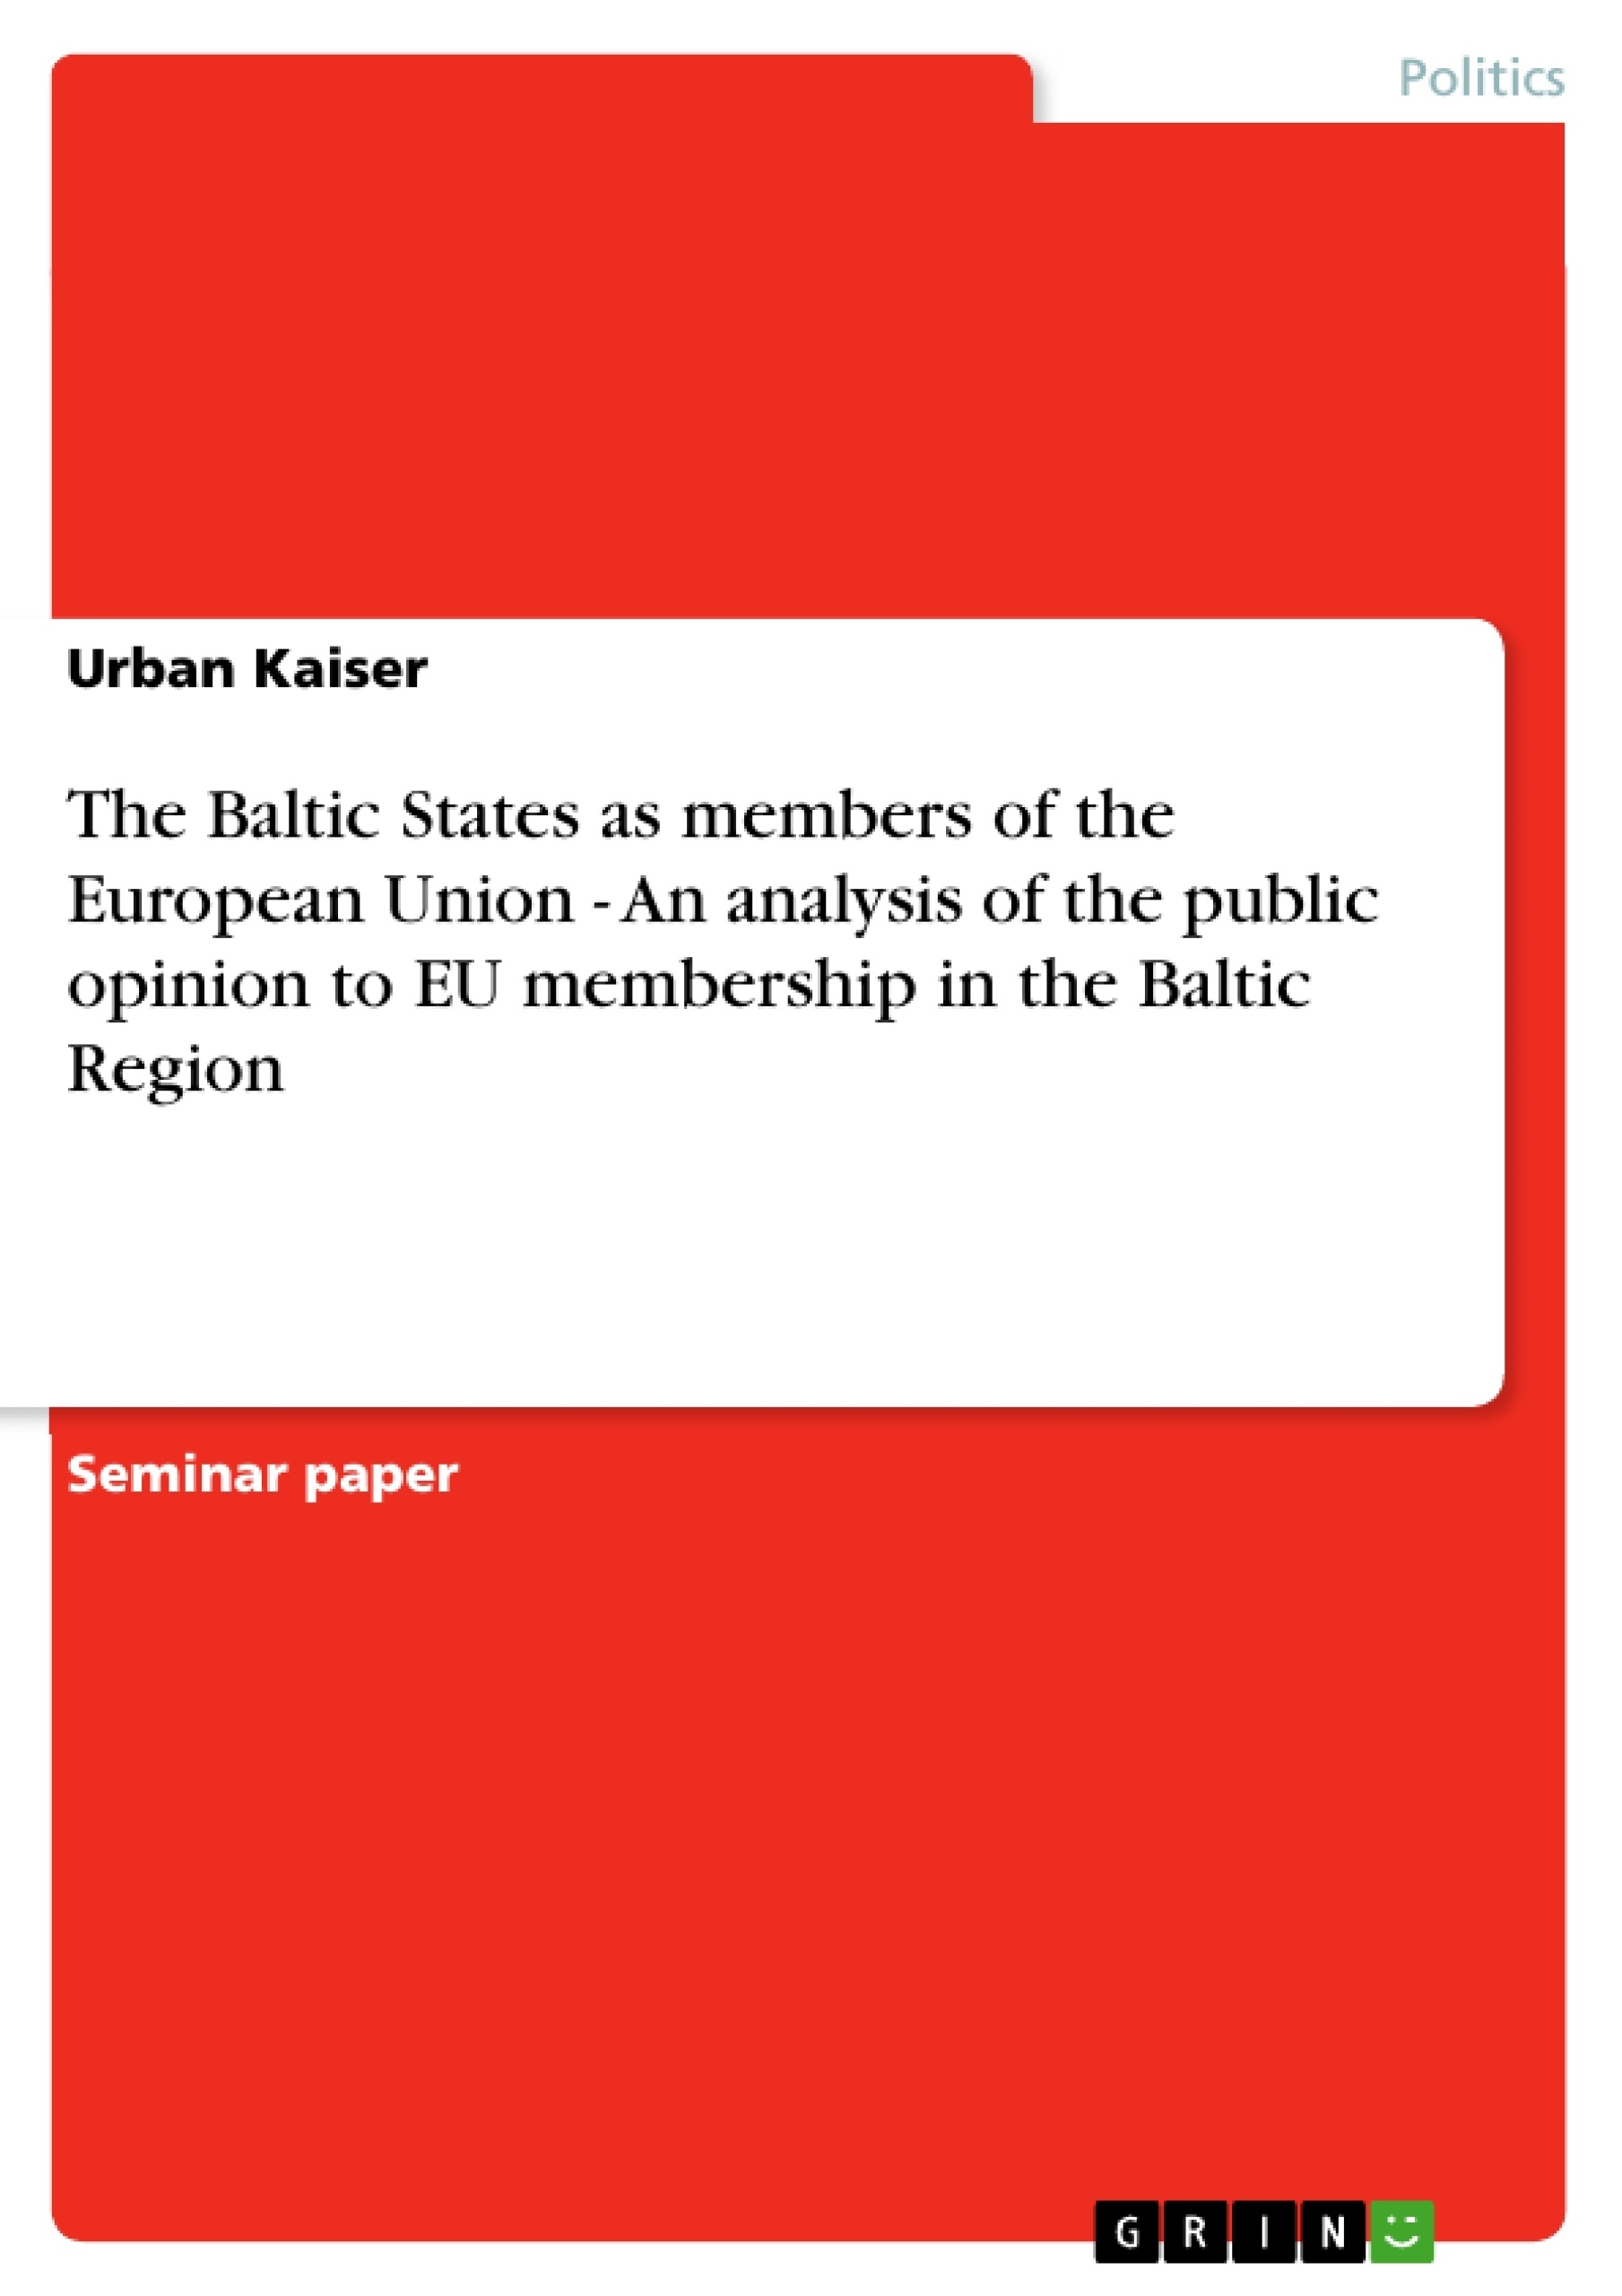 Title: The Baltic States as members of the European Union - An analysis of the public opinion to EU membership in the Baltic Region